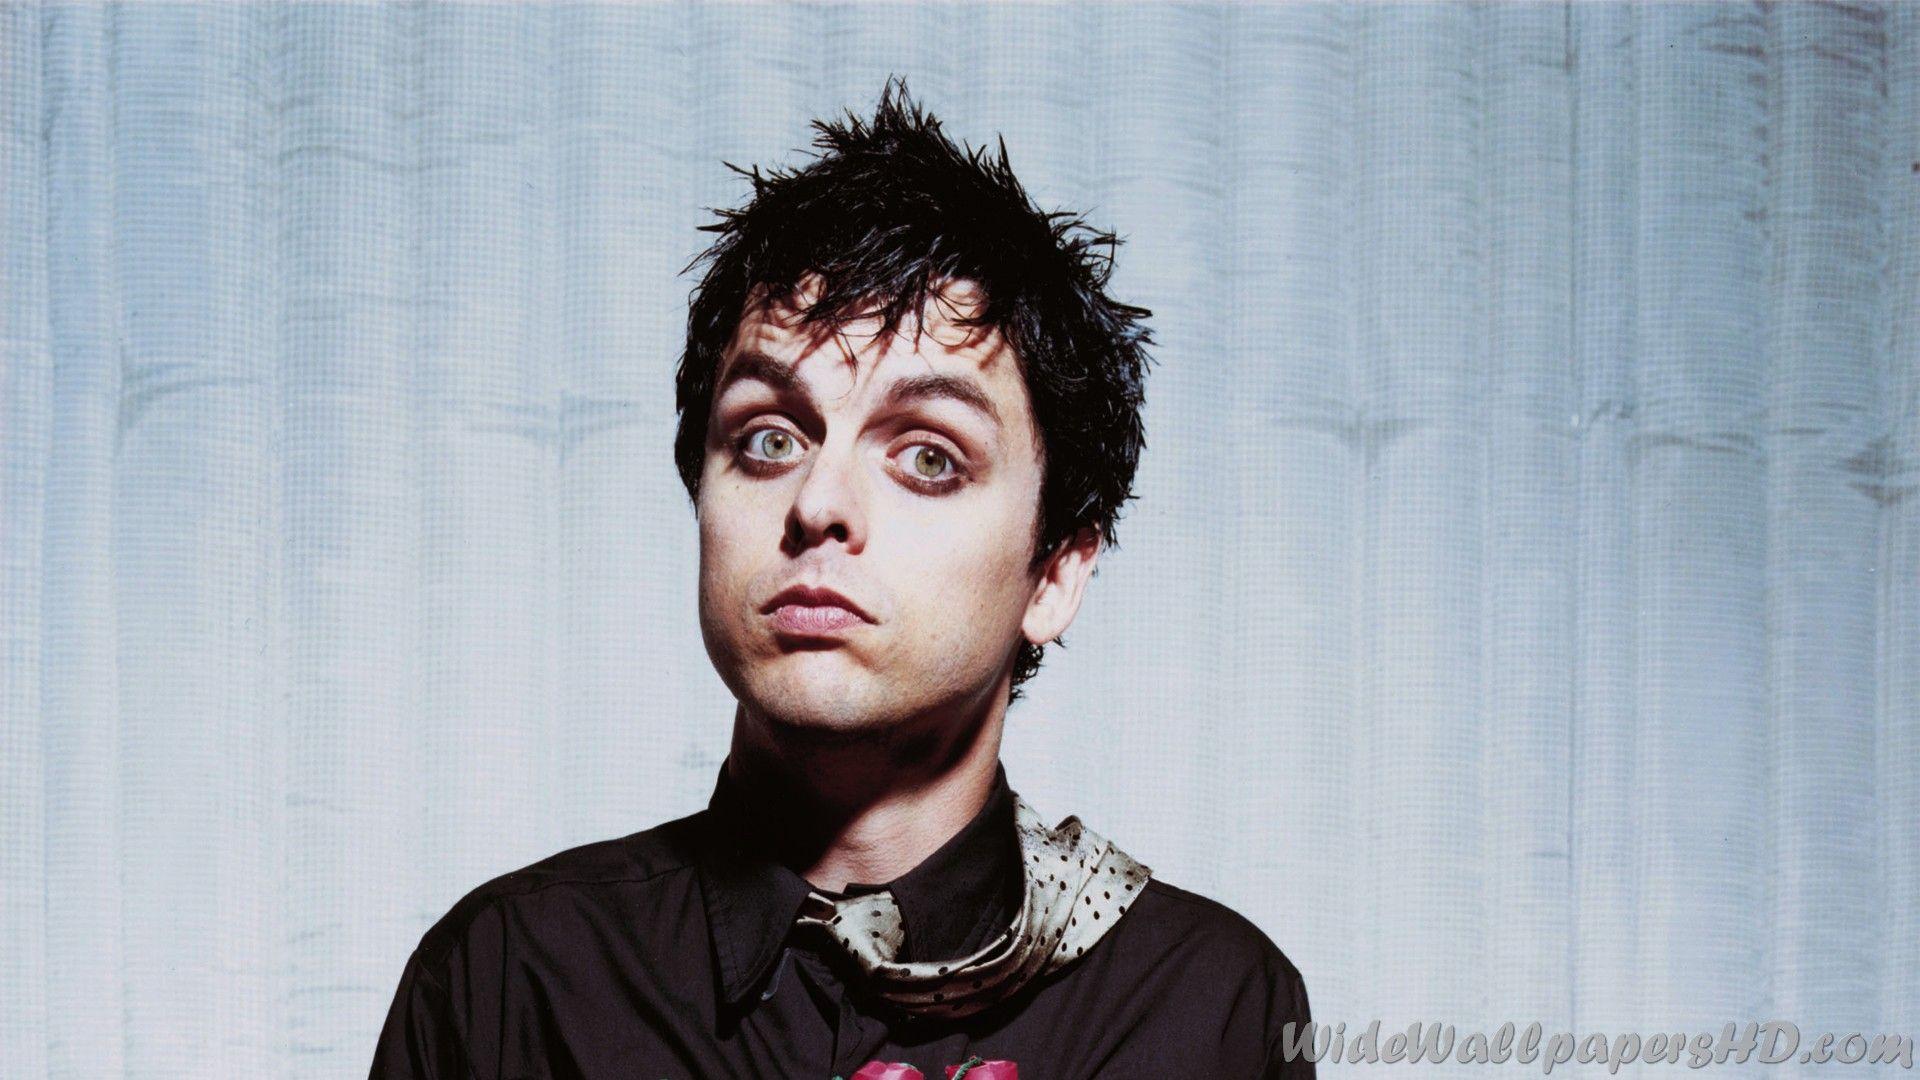 Billie Joe Armstrong Criticises School For Cancelling 'American